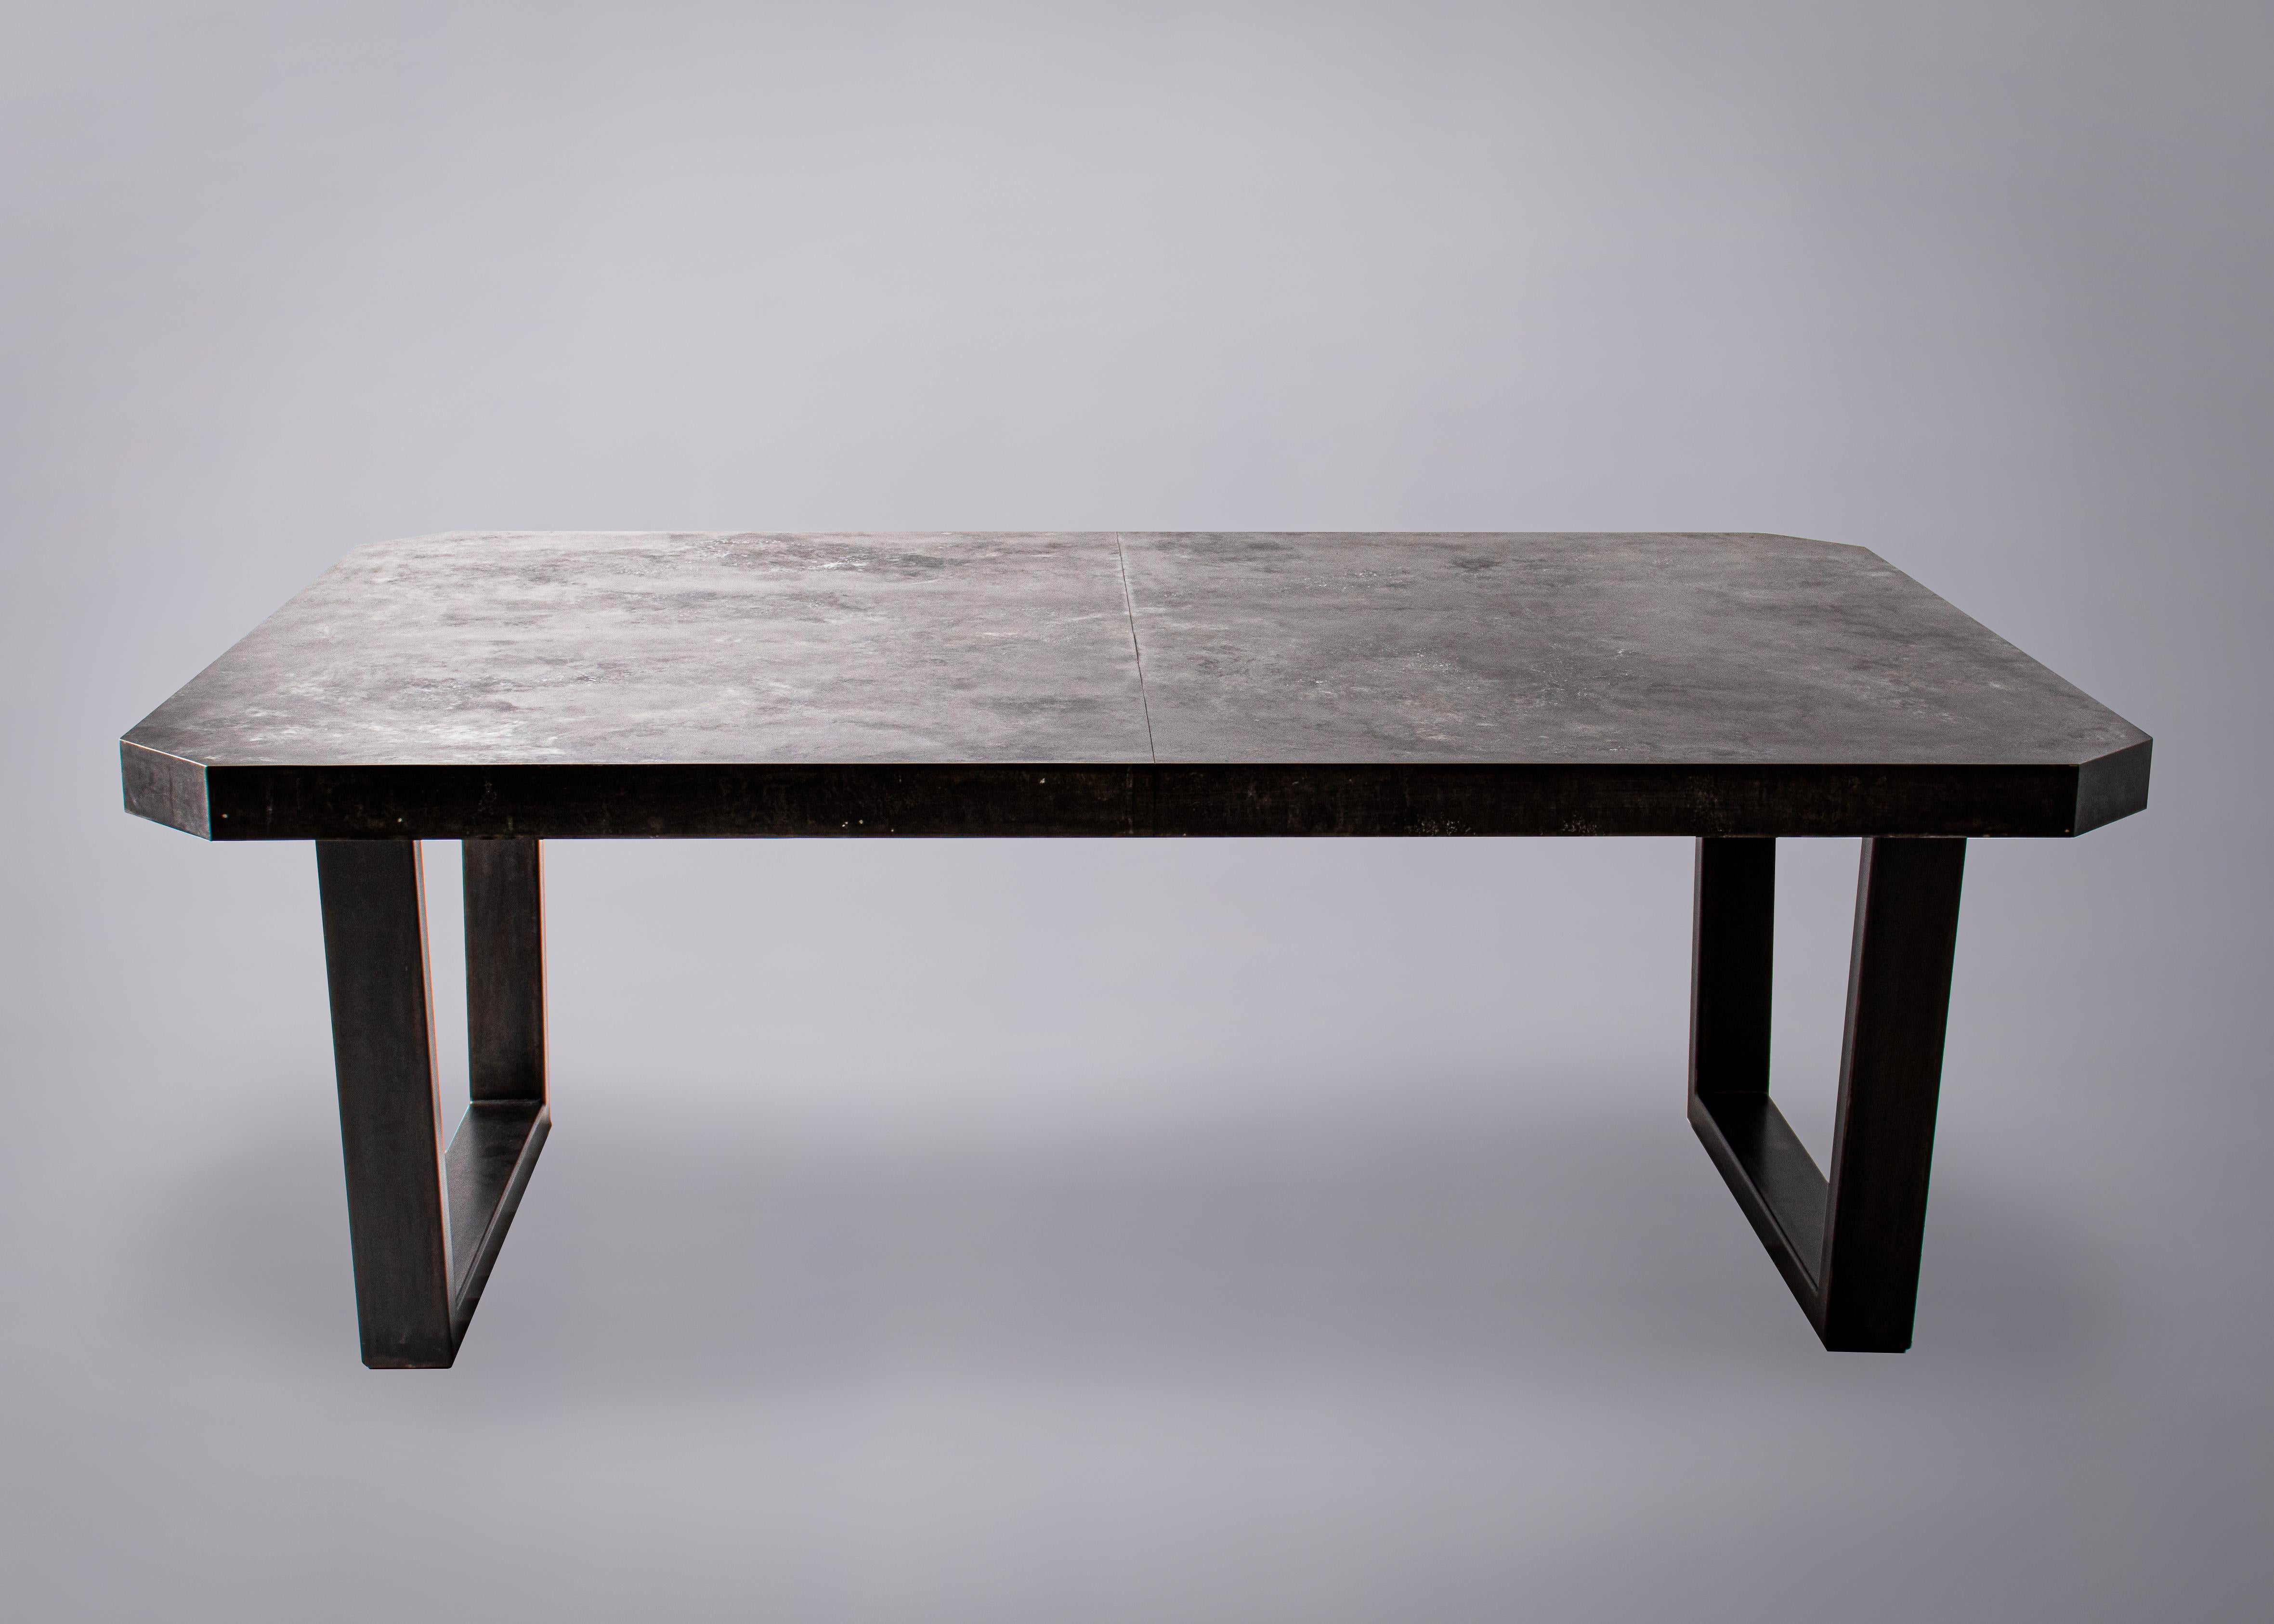 Zinc Octogon Dining Table with Black Hollow Steel Base In Good Condition For Sale In Dallas, TX